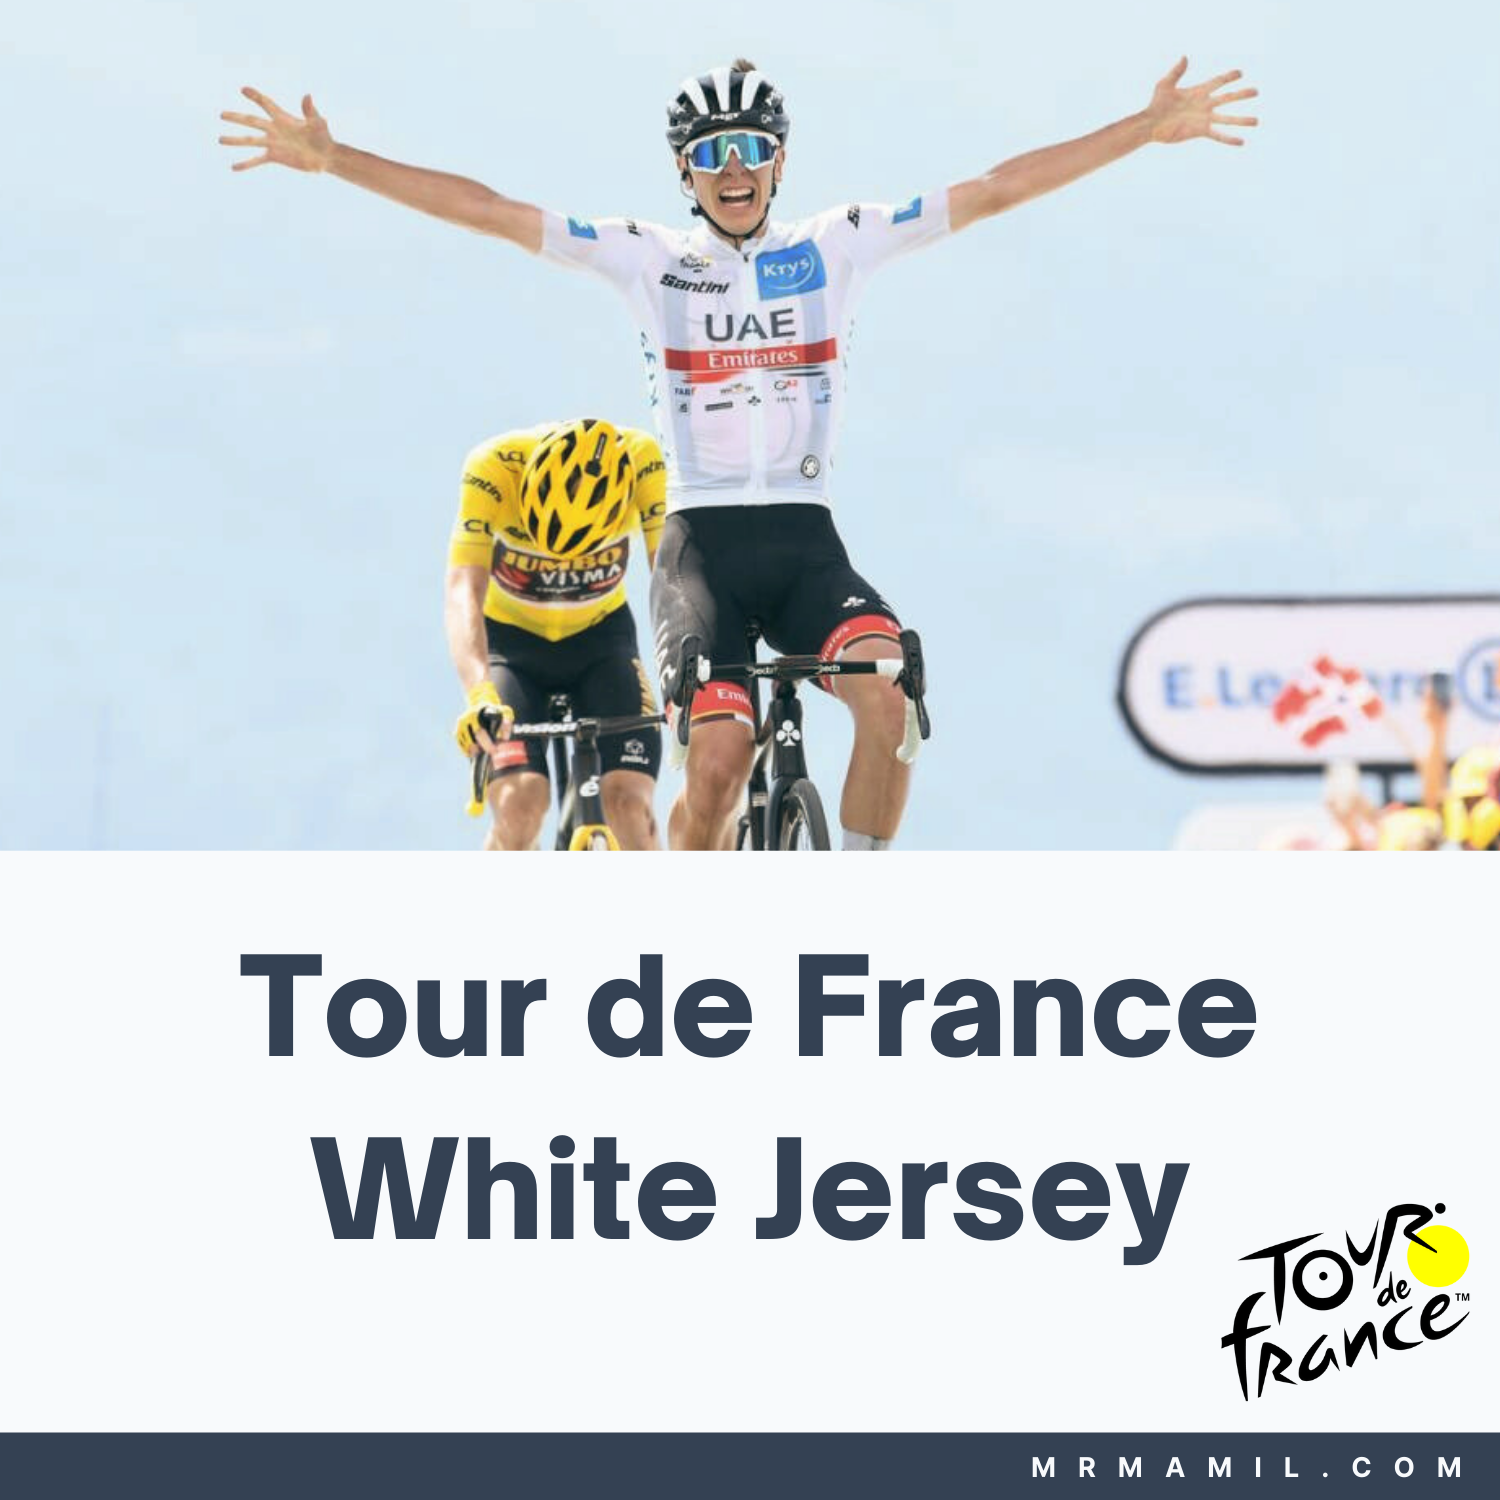 Tour de France White Jersey (Best Young Rider) Winners